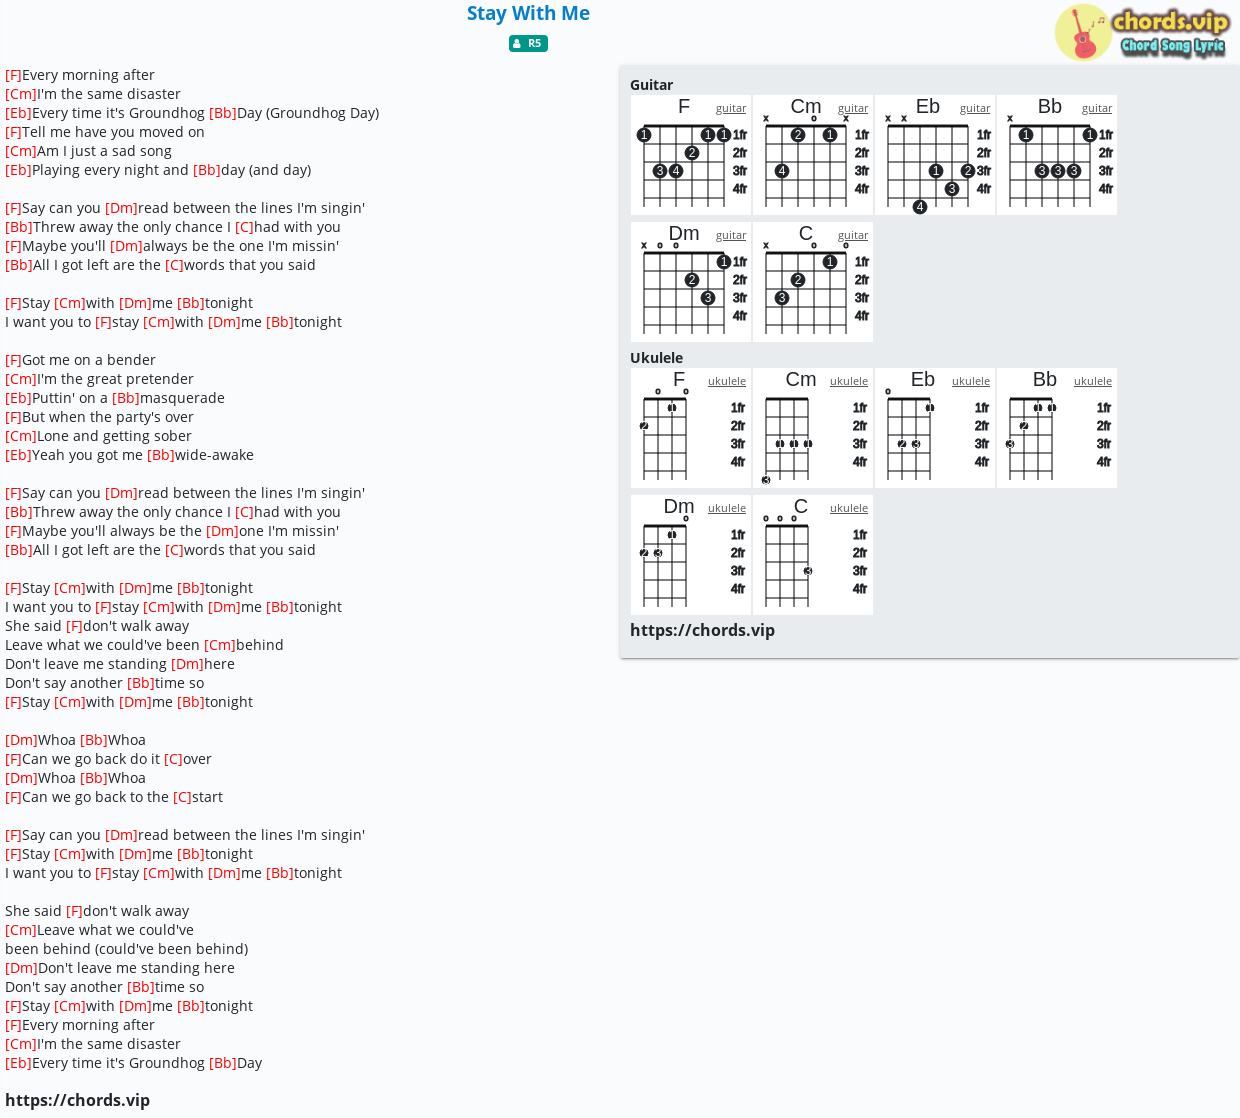 Chord: Stay With Me - - song lyric, sheet, guitar, ukulele | chords .vip